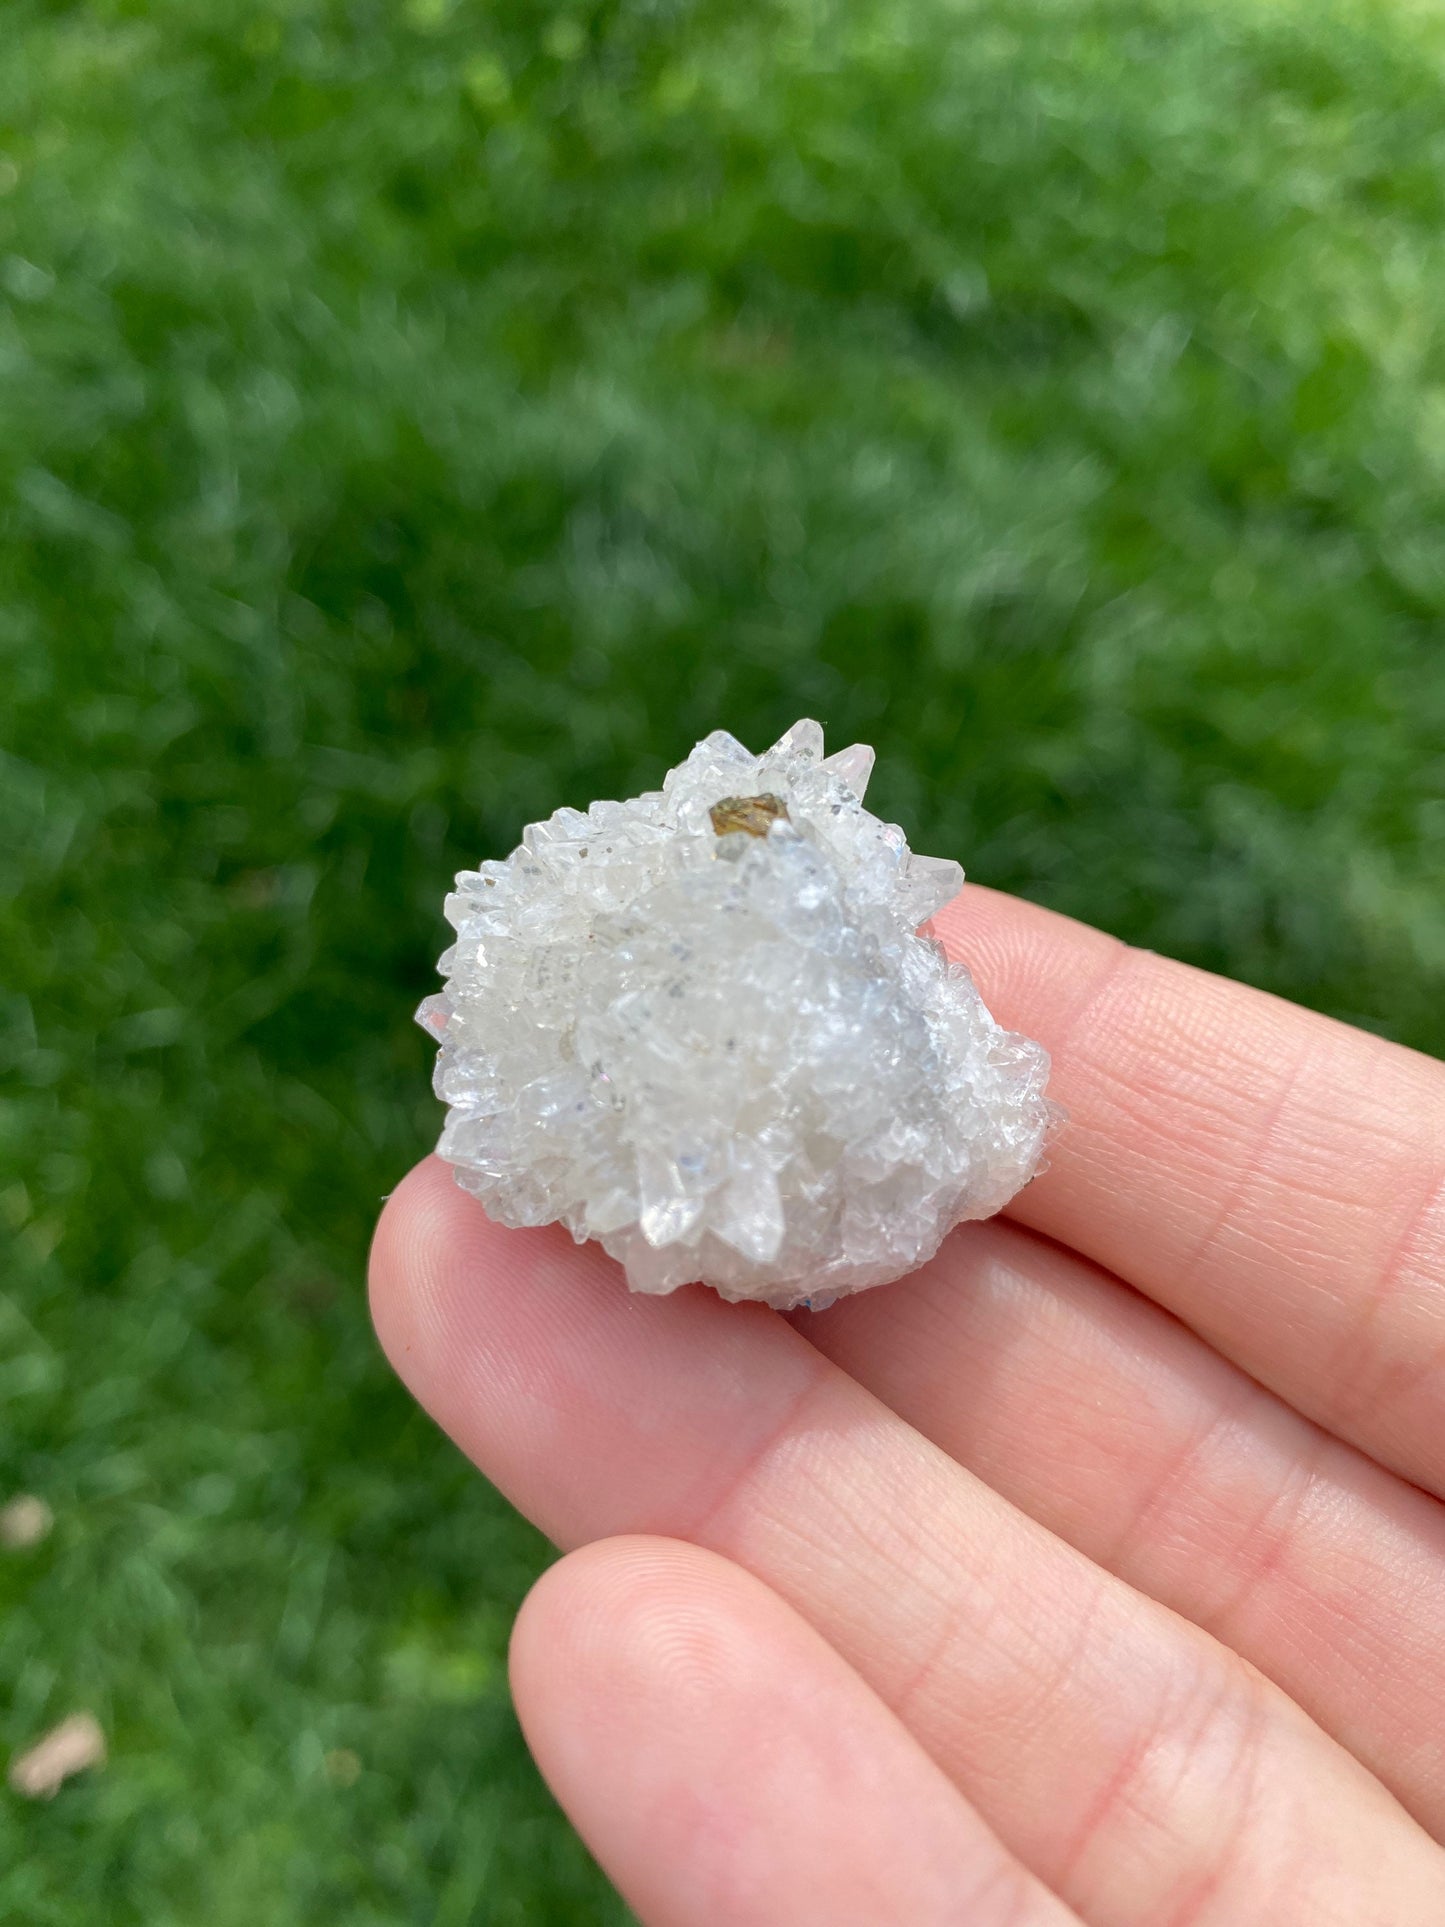 Clear Calcite Crystal Specimen with Marcasite - Buffalo Iowa - Linwood Mine